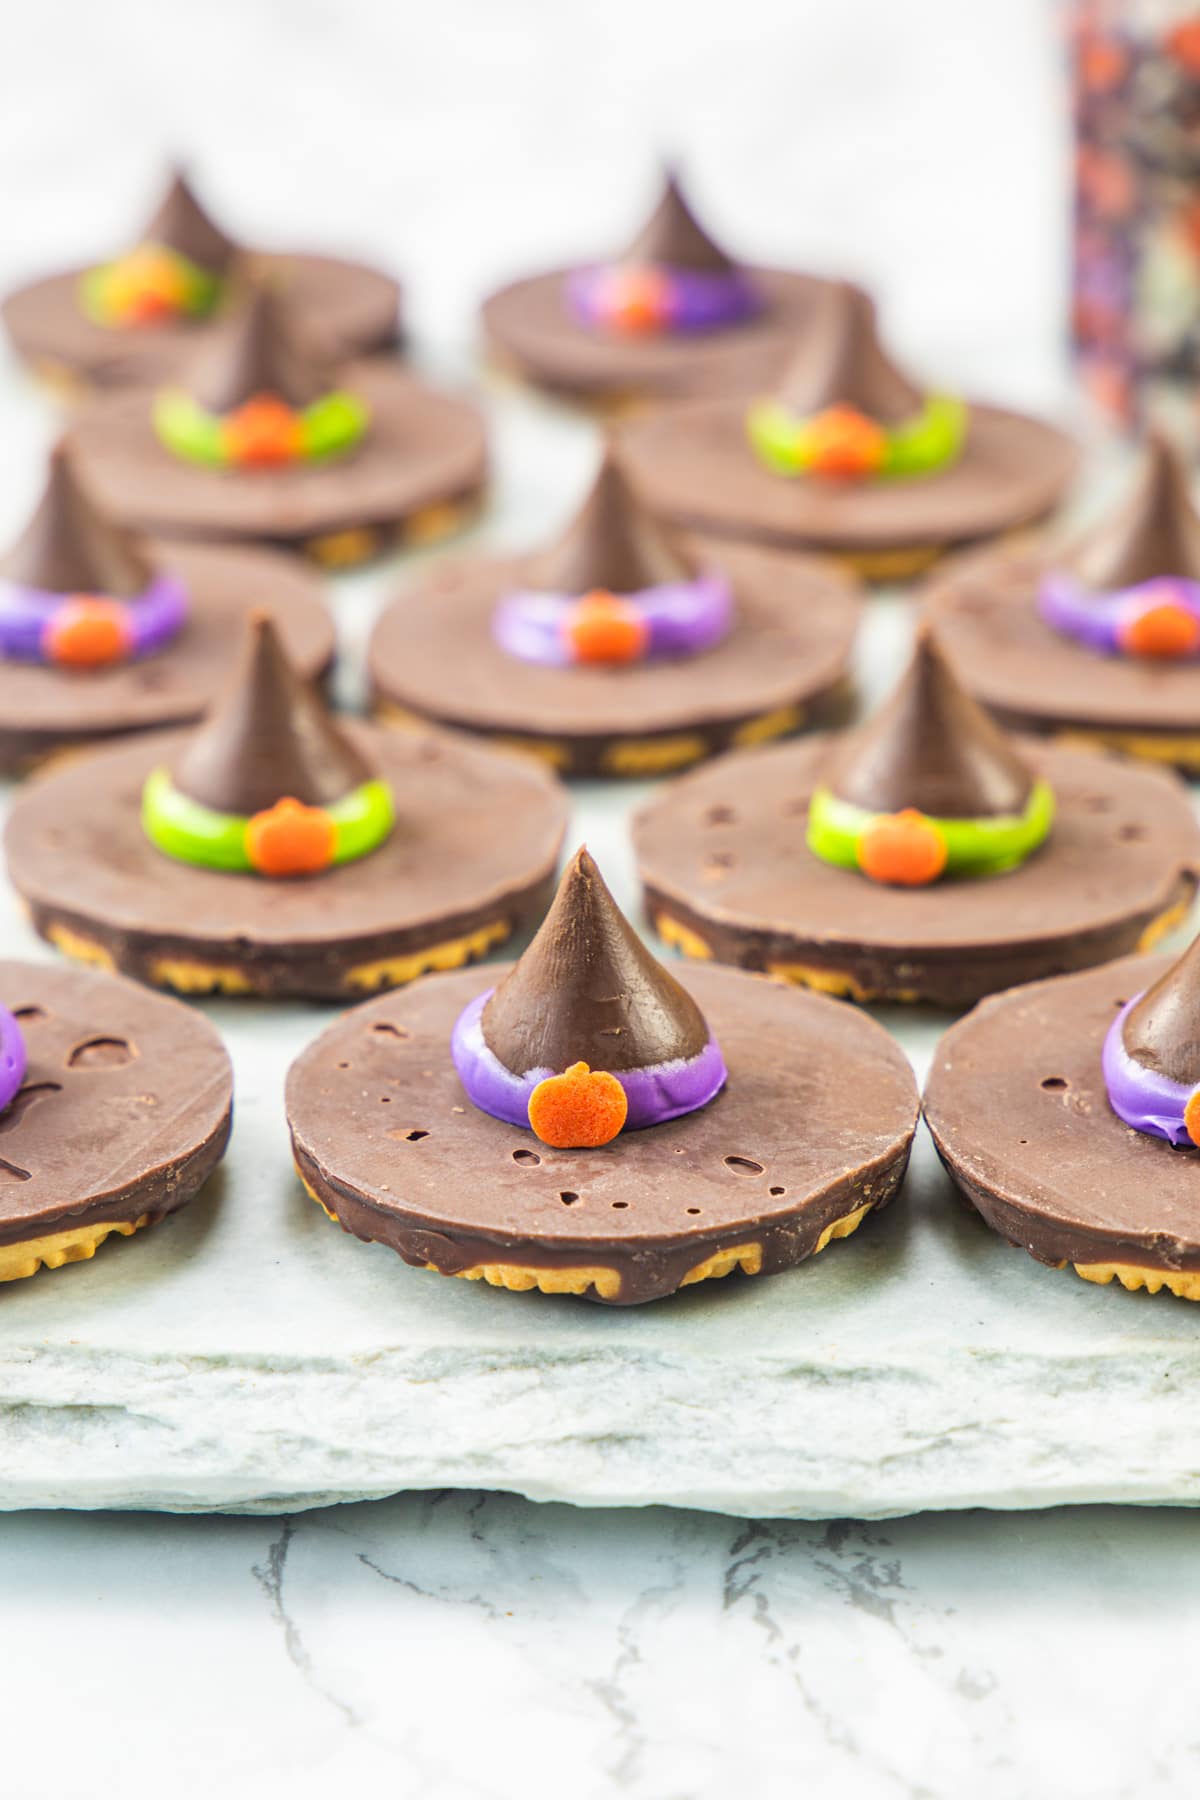 Witch hat cookies arranged on a marble surface.